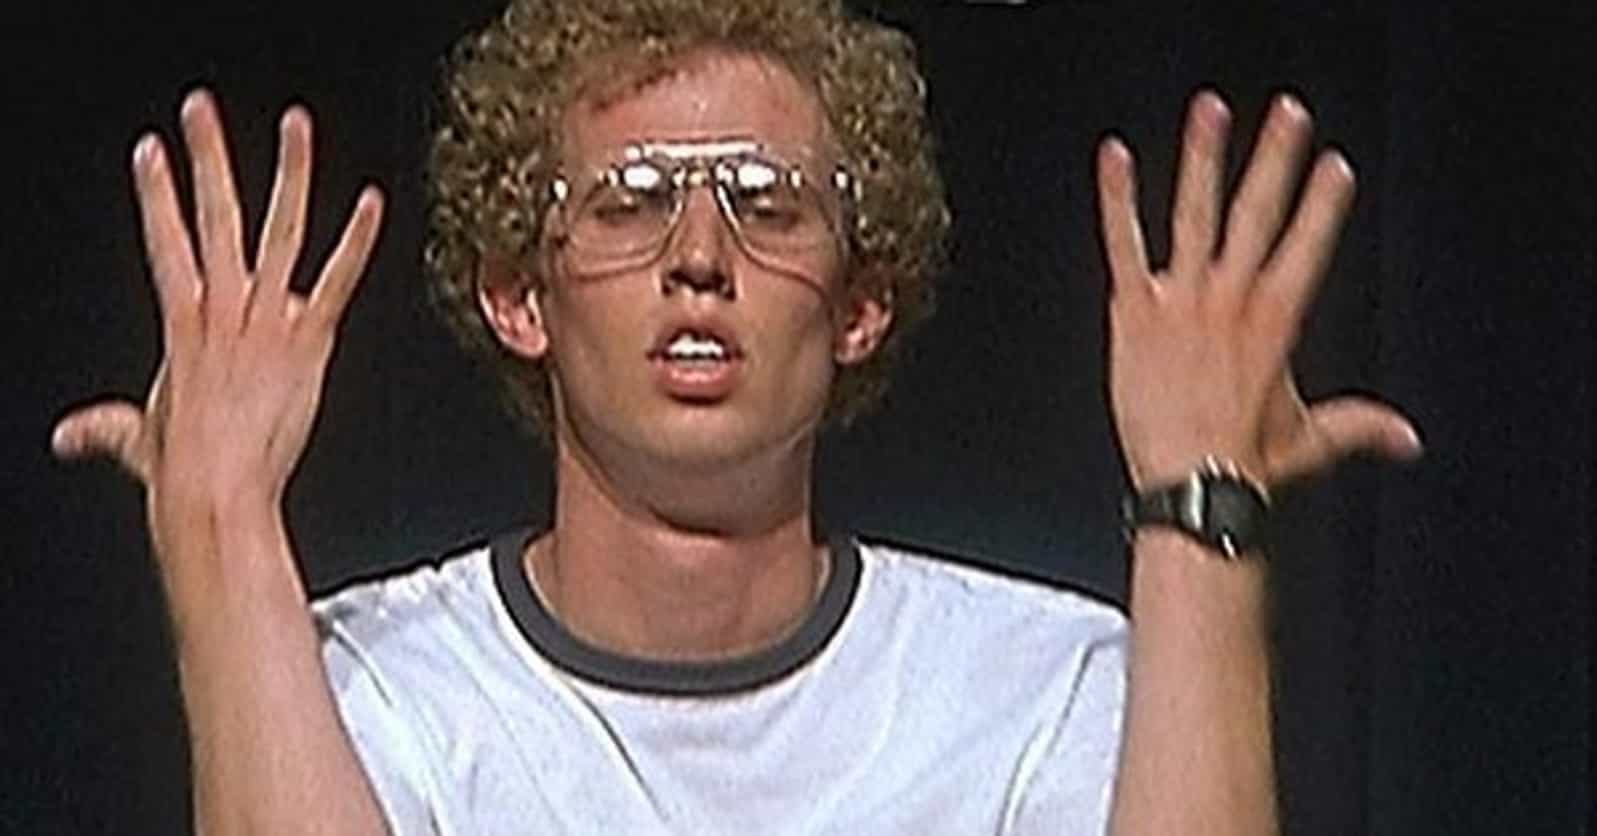 The Best 'Napoleon Dynamite' Quotes, Ranked